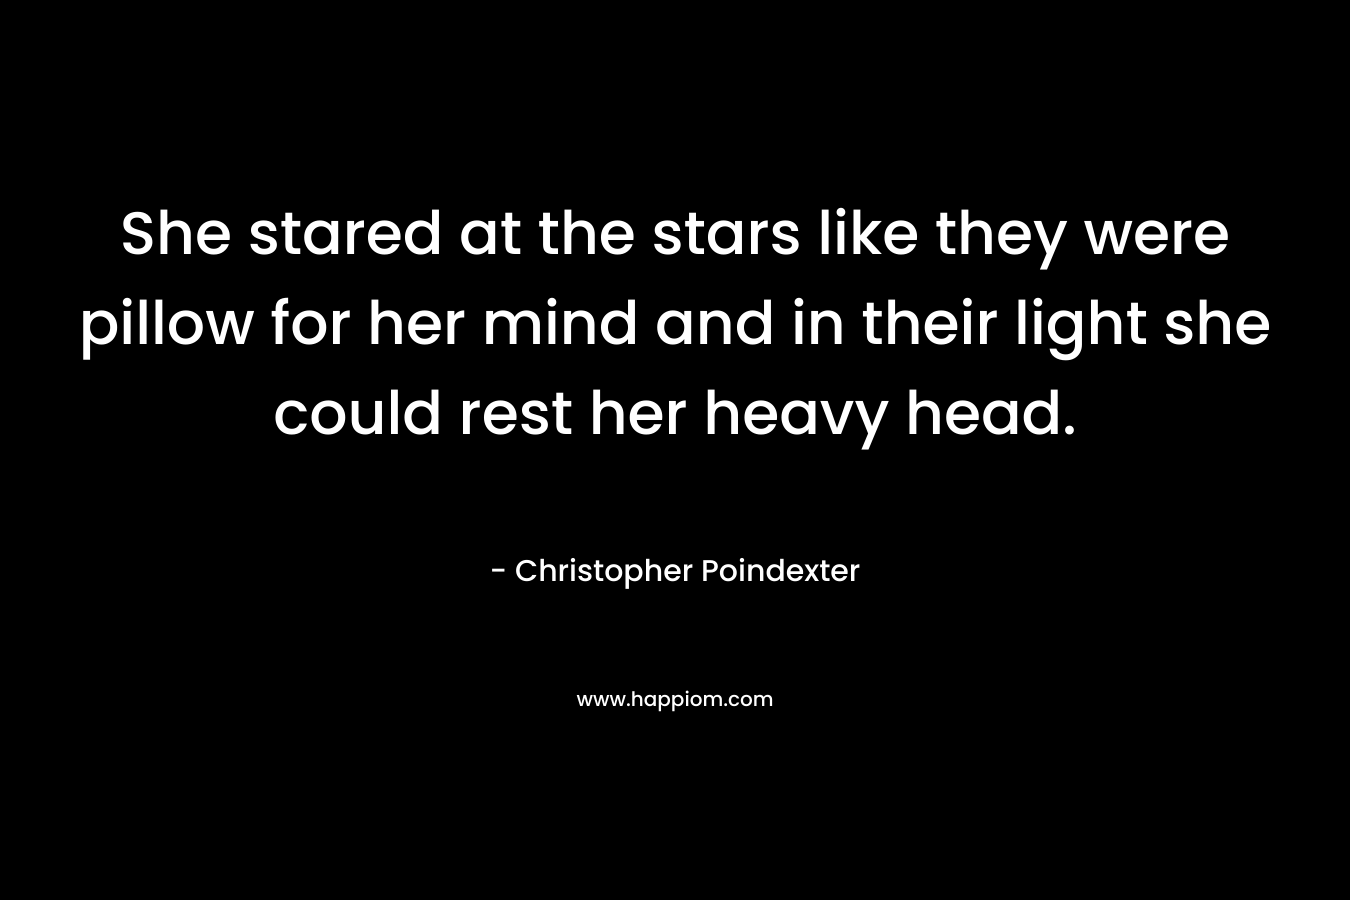 She stared at the stars like they were pillow for her mind and in their light she could rest her heavy head.